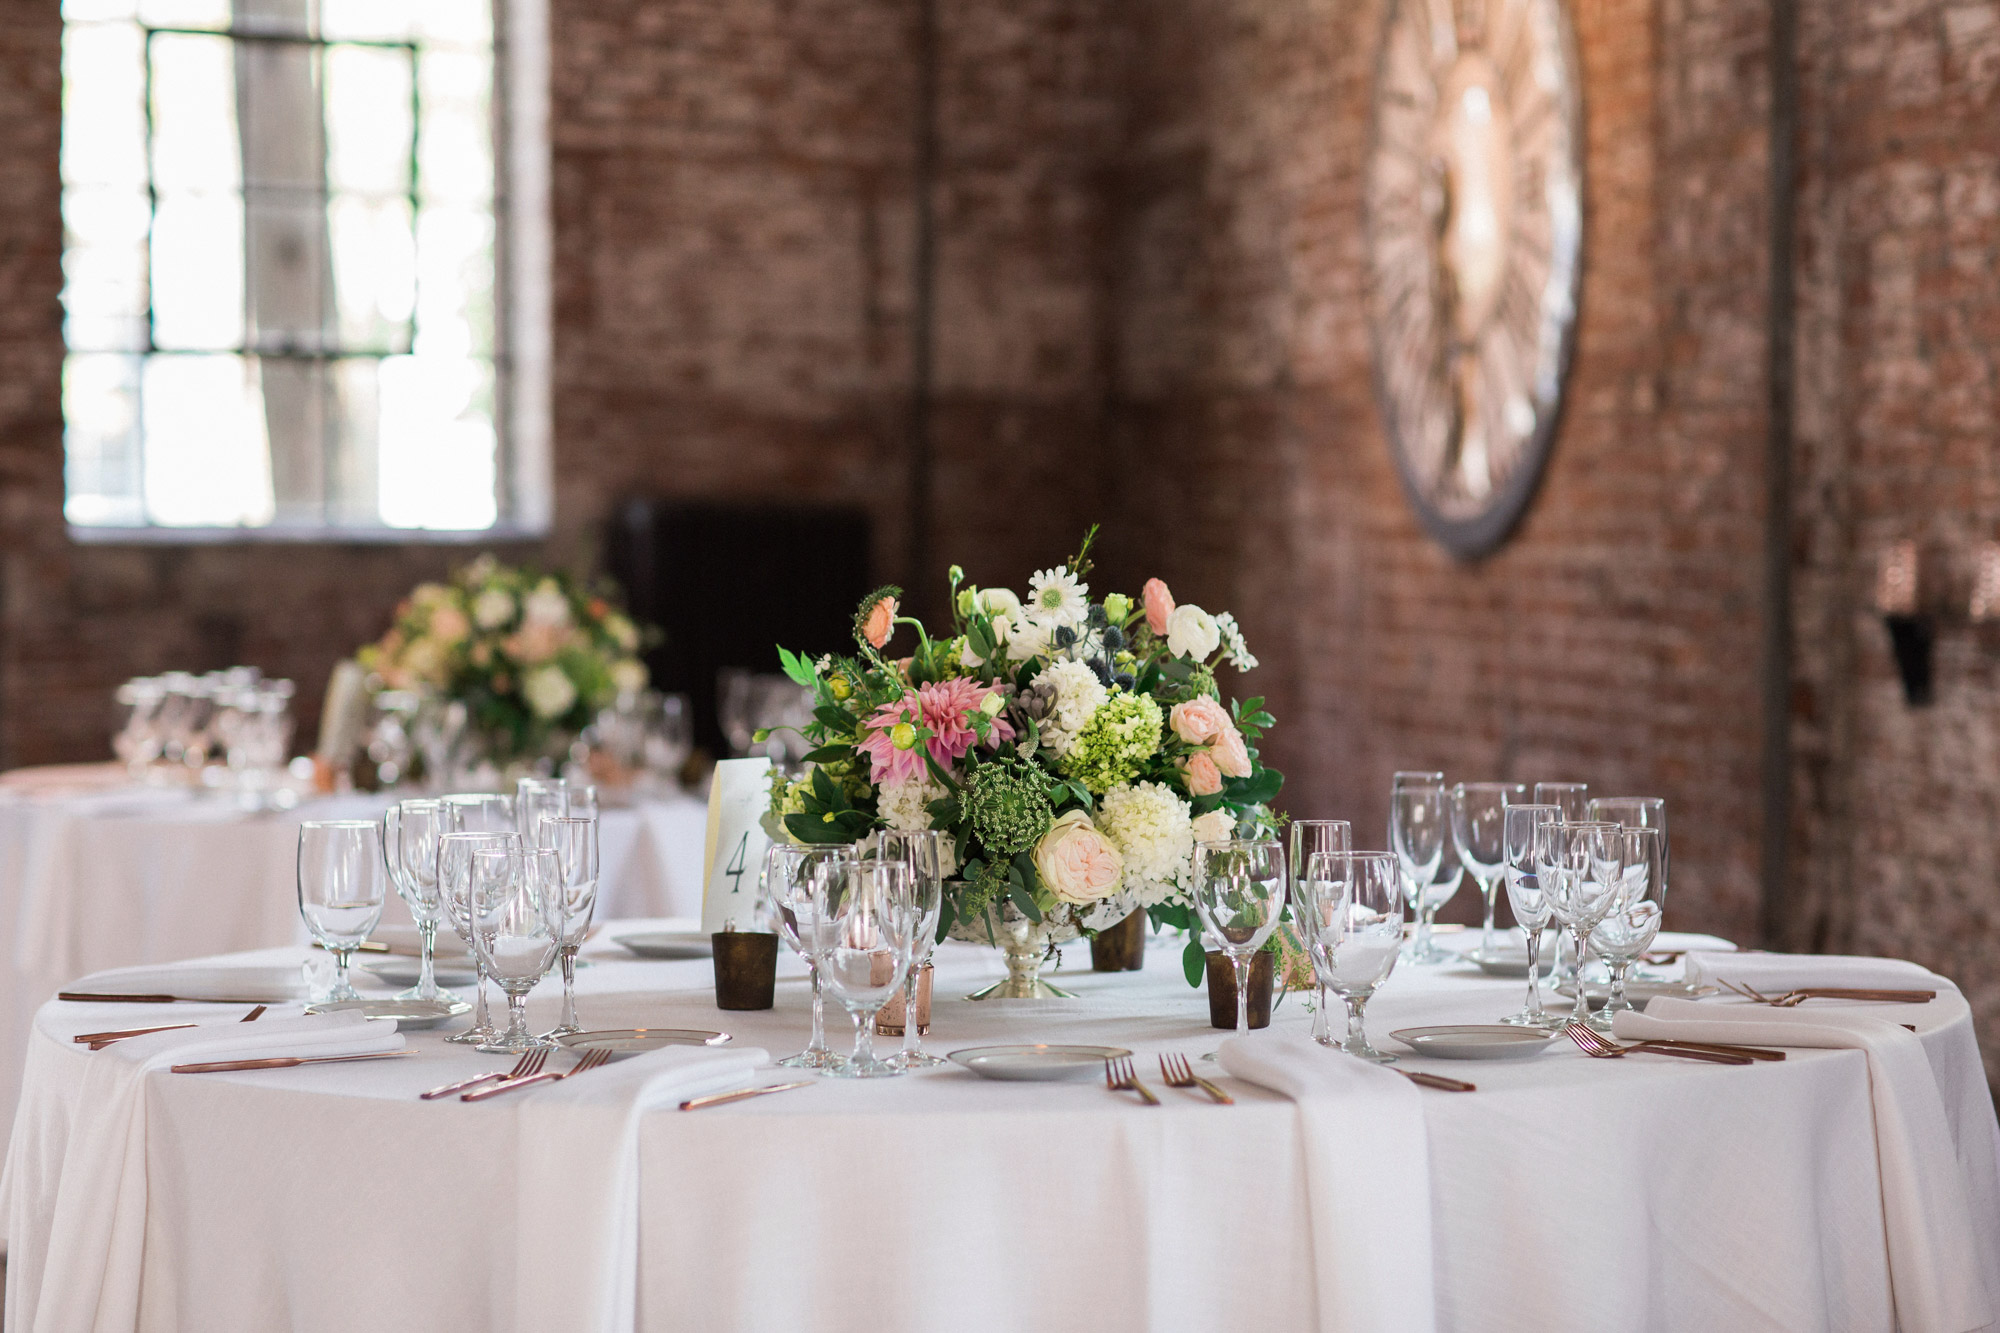 Industrial wedding at The Senate Garage in Kingston, New York in the Hudson Valley. Photos by Kelly Kollar Photography.